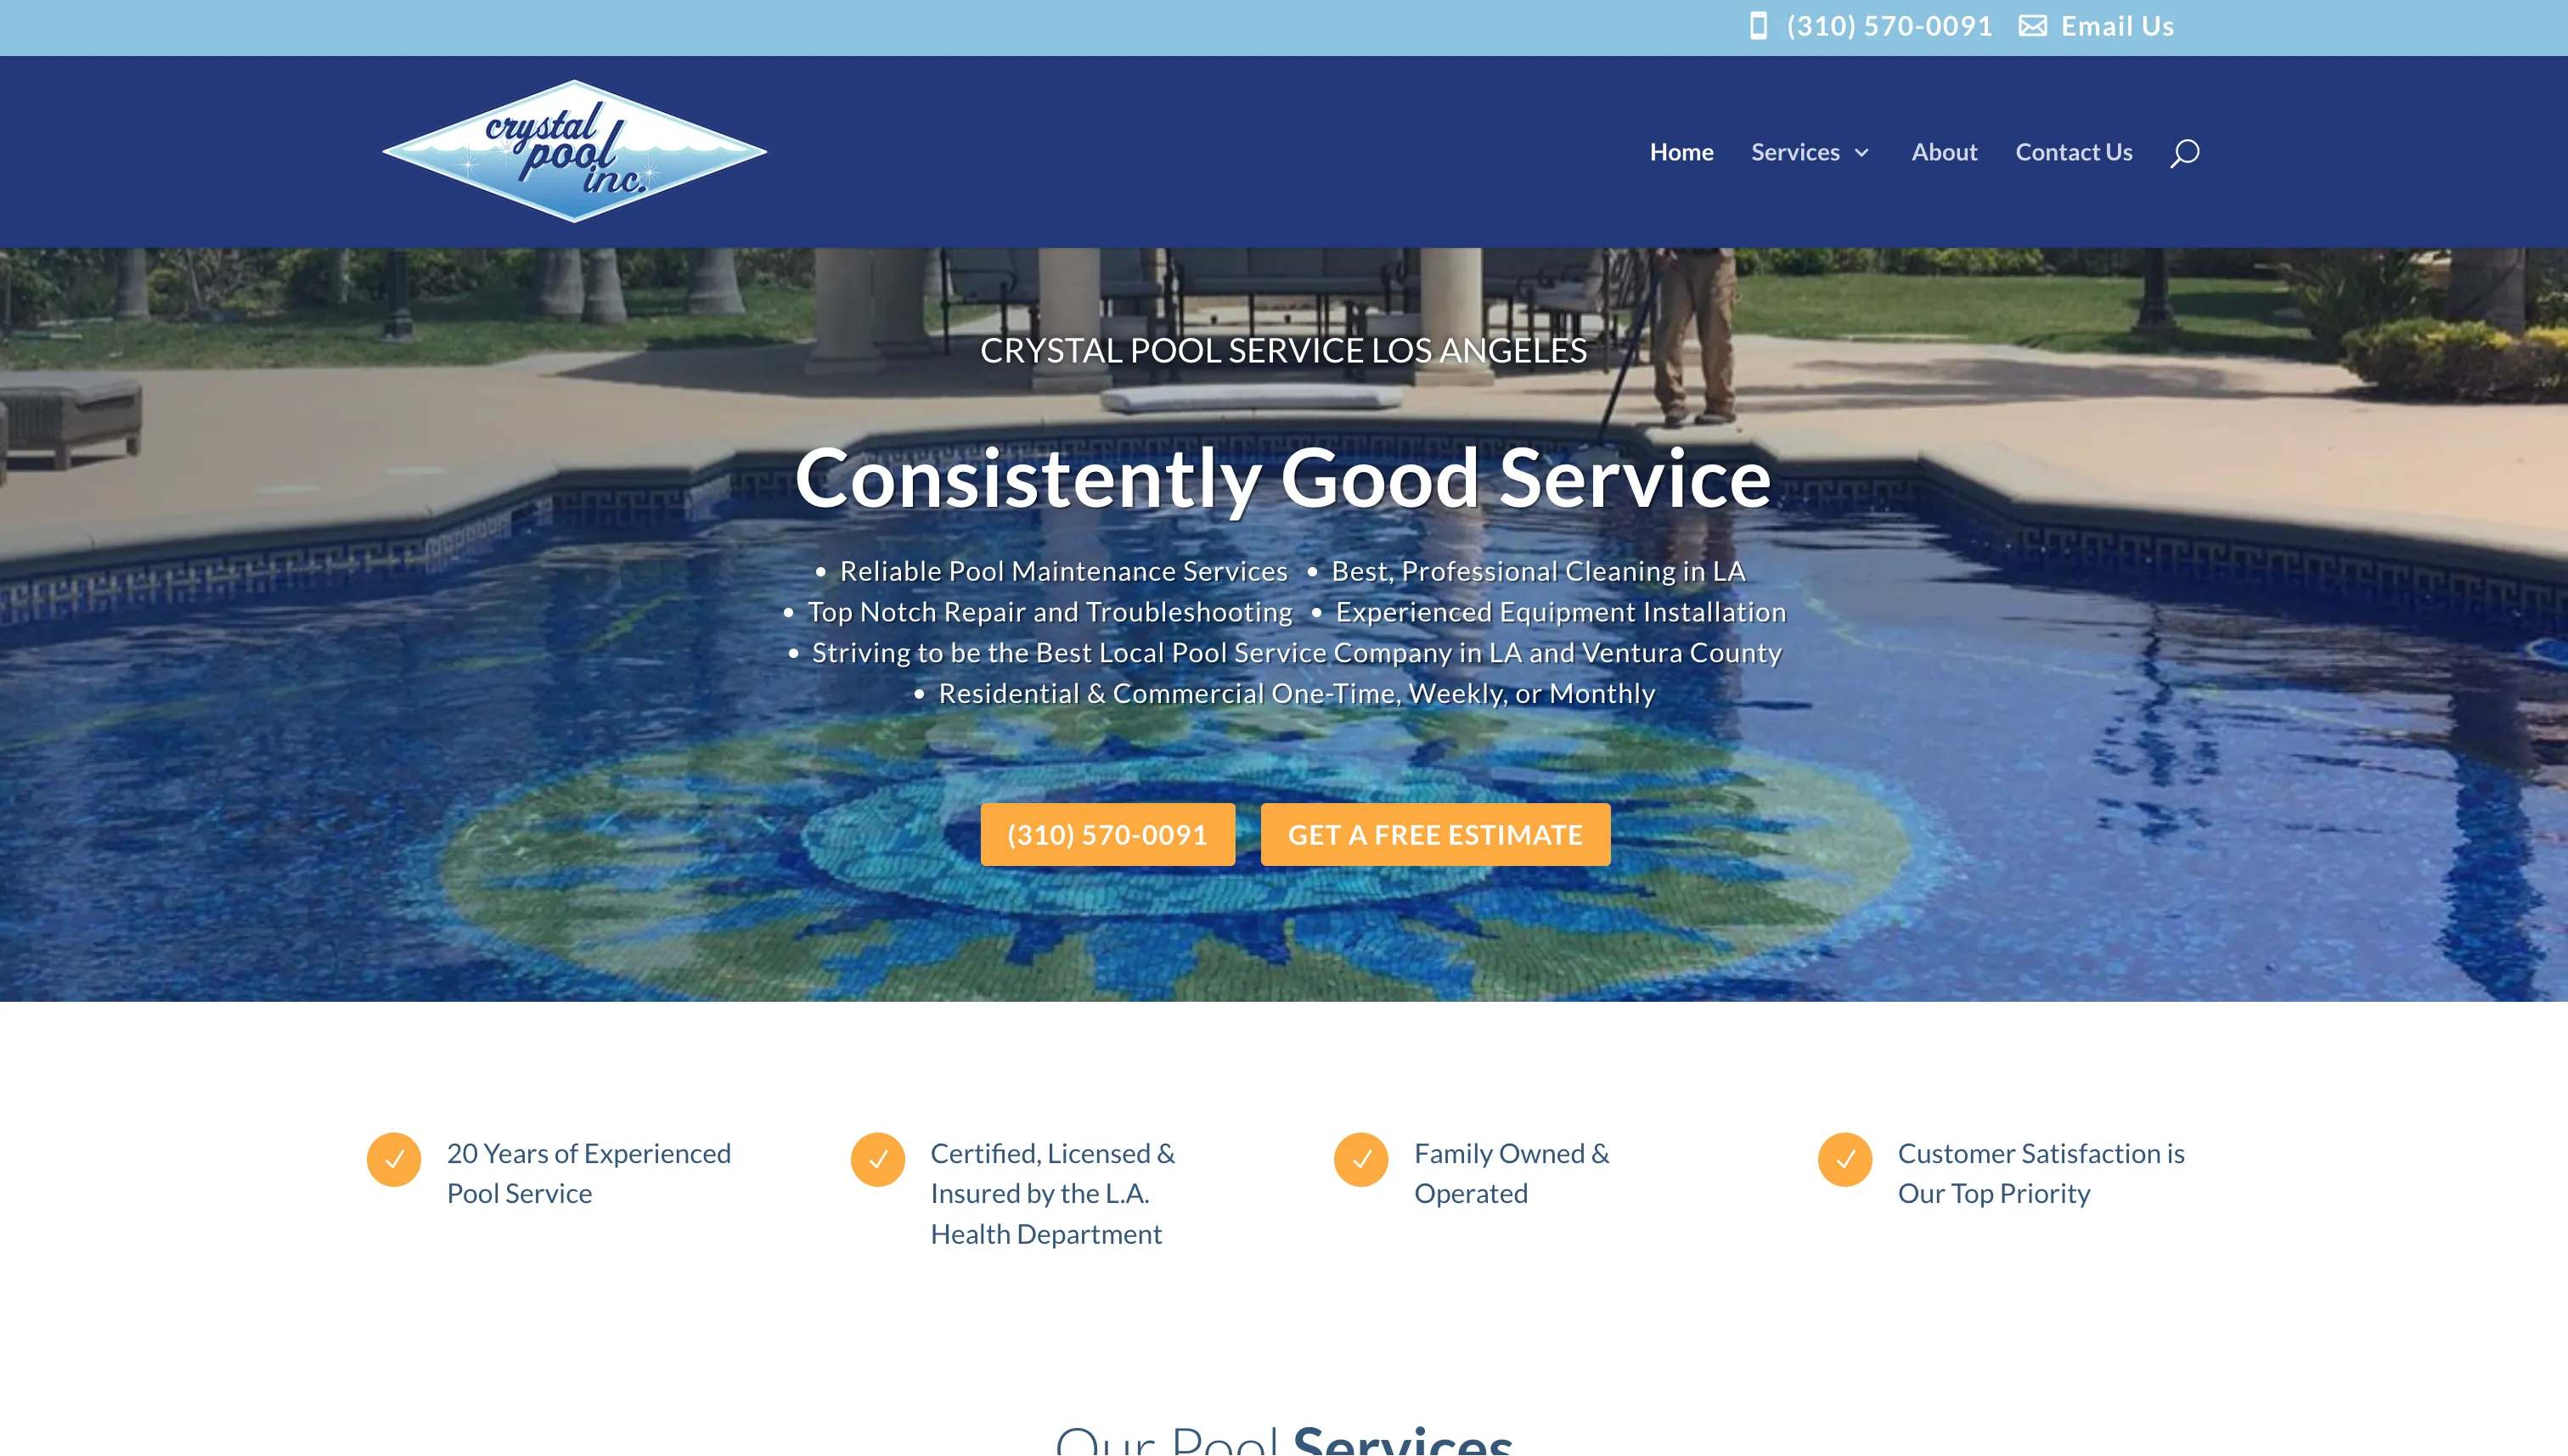 Crystal Pool Services home page